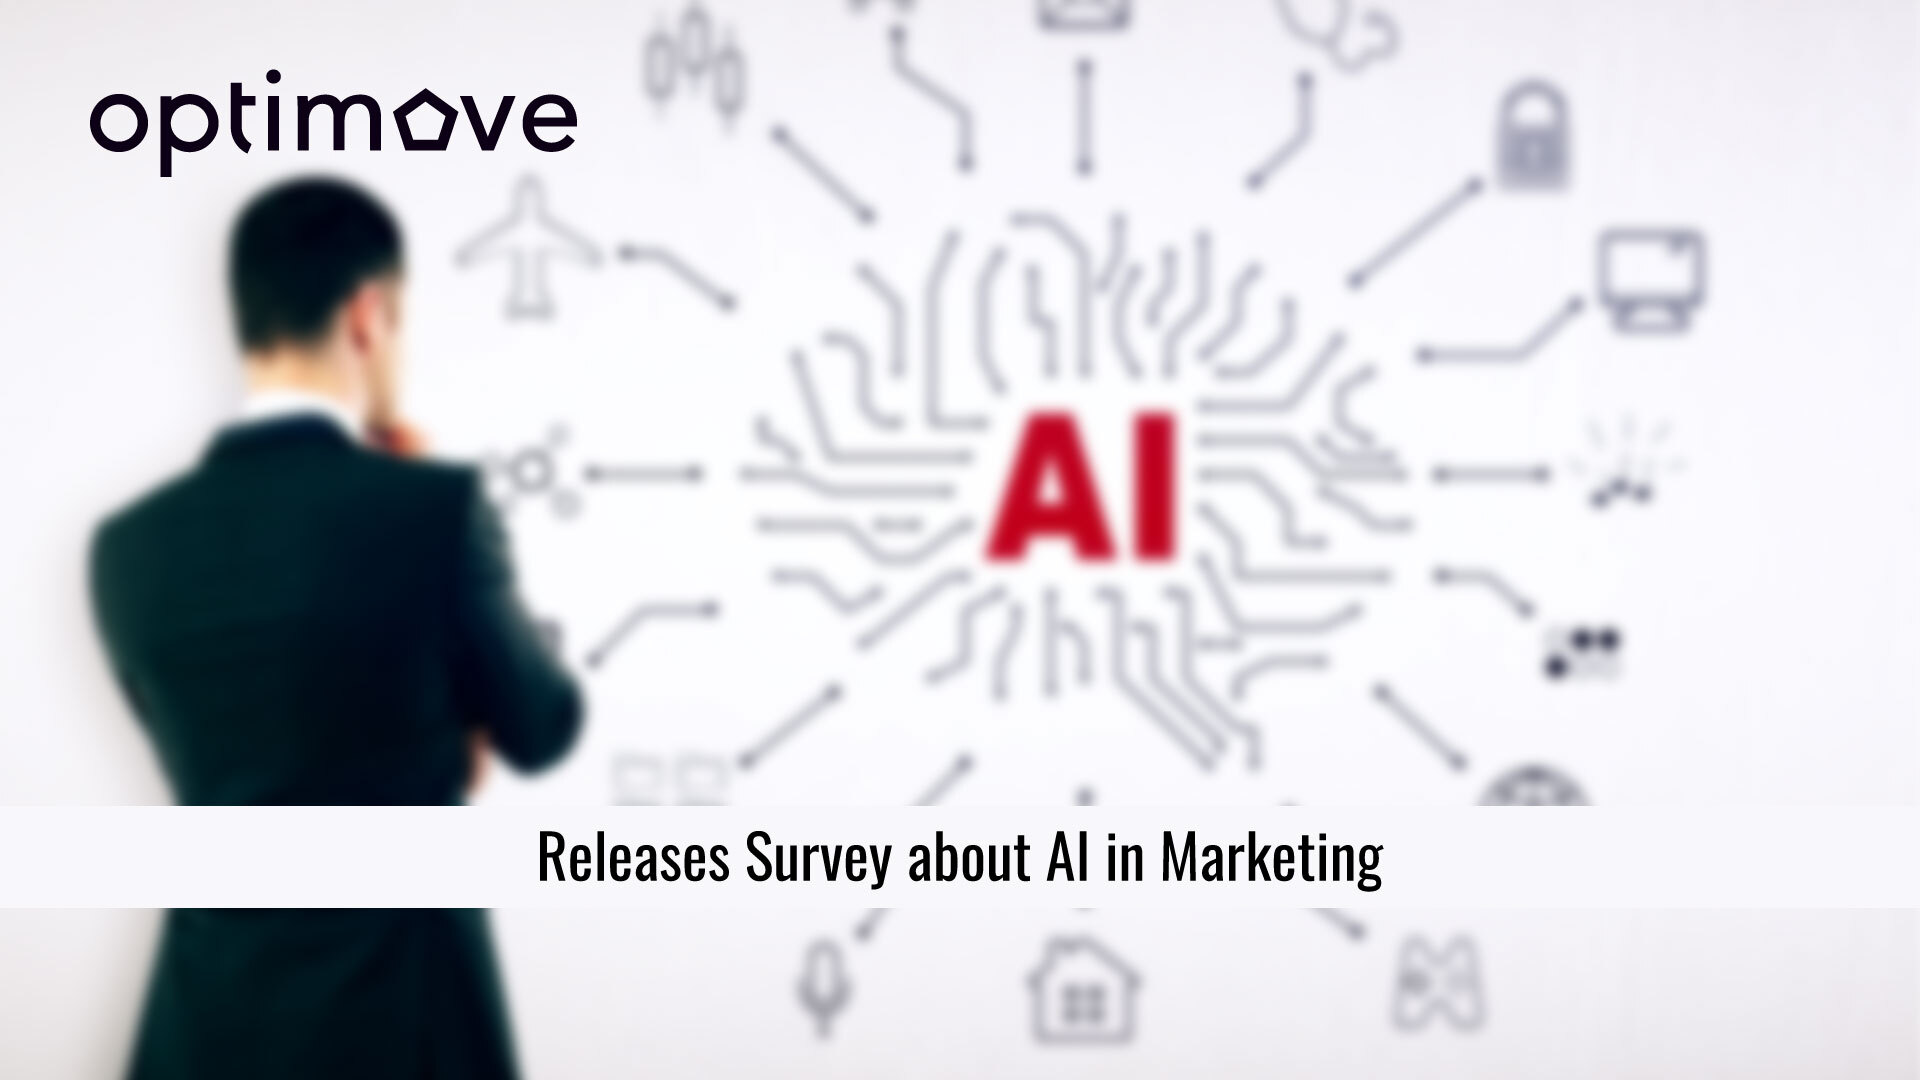 78% of digital B2C marketers say AI helps marketing, while 47% responded that AI is dangerous: Optimove survey